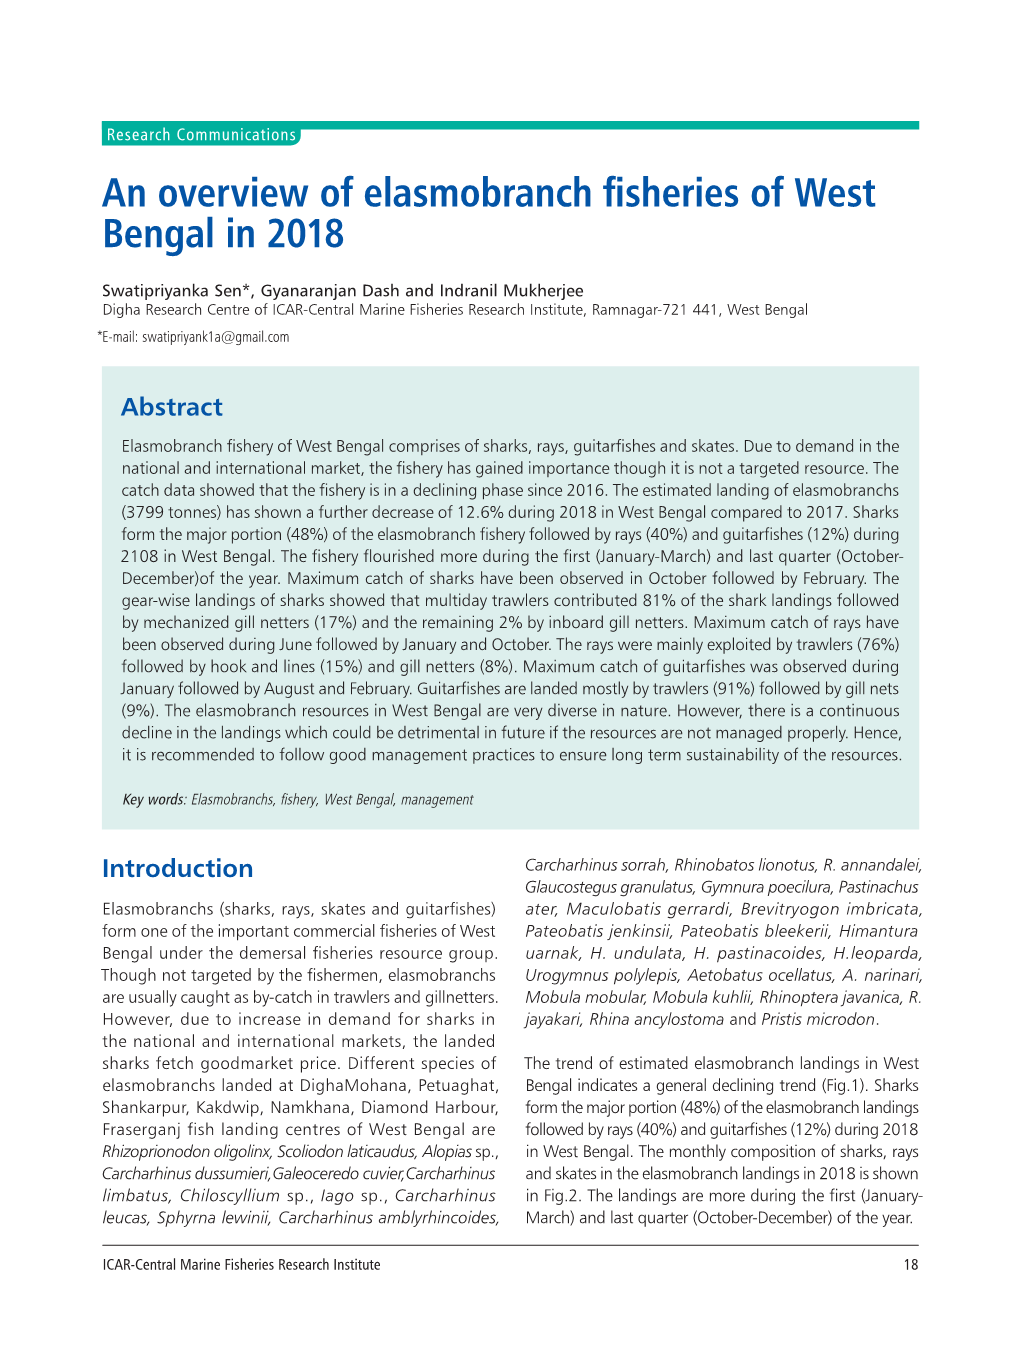 An Overview of Elasmobranch Fisheries of West Bengal in 2018